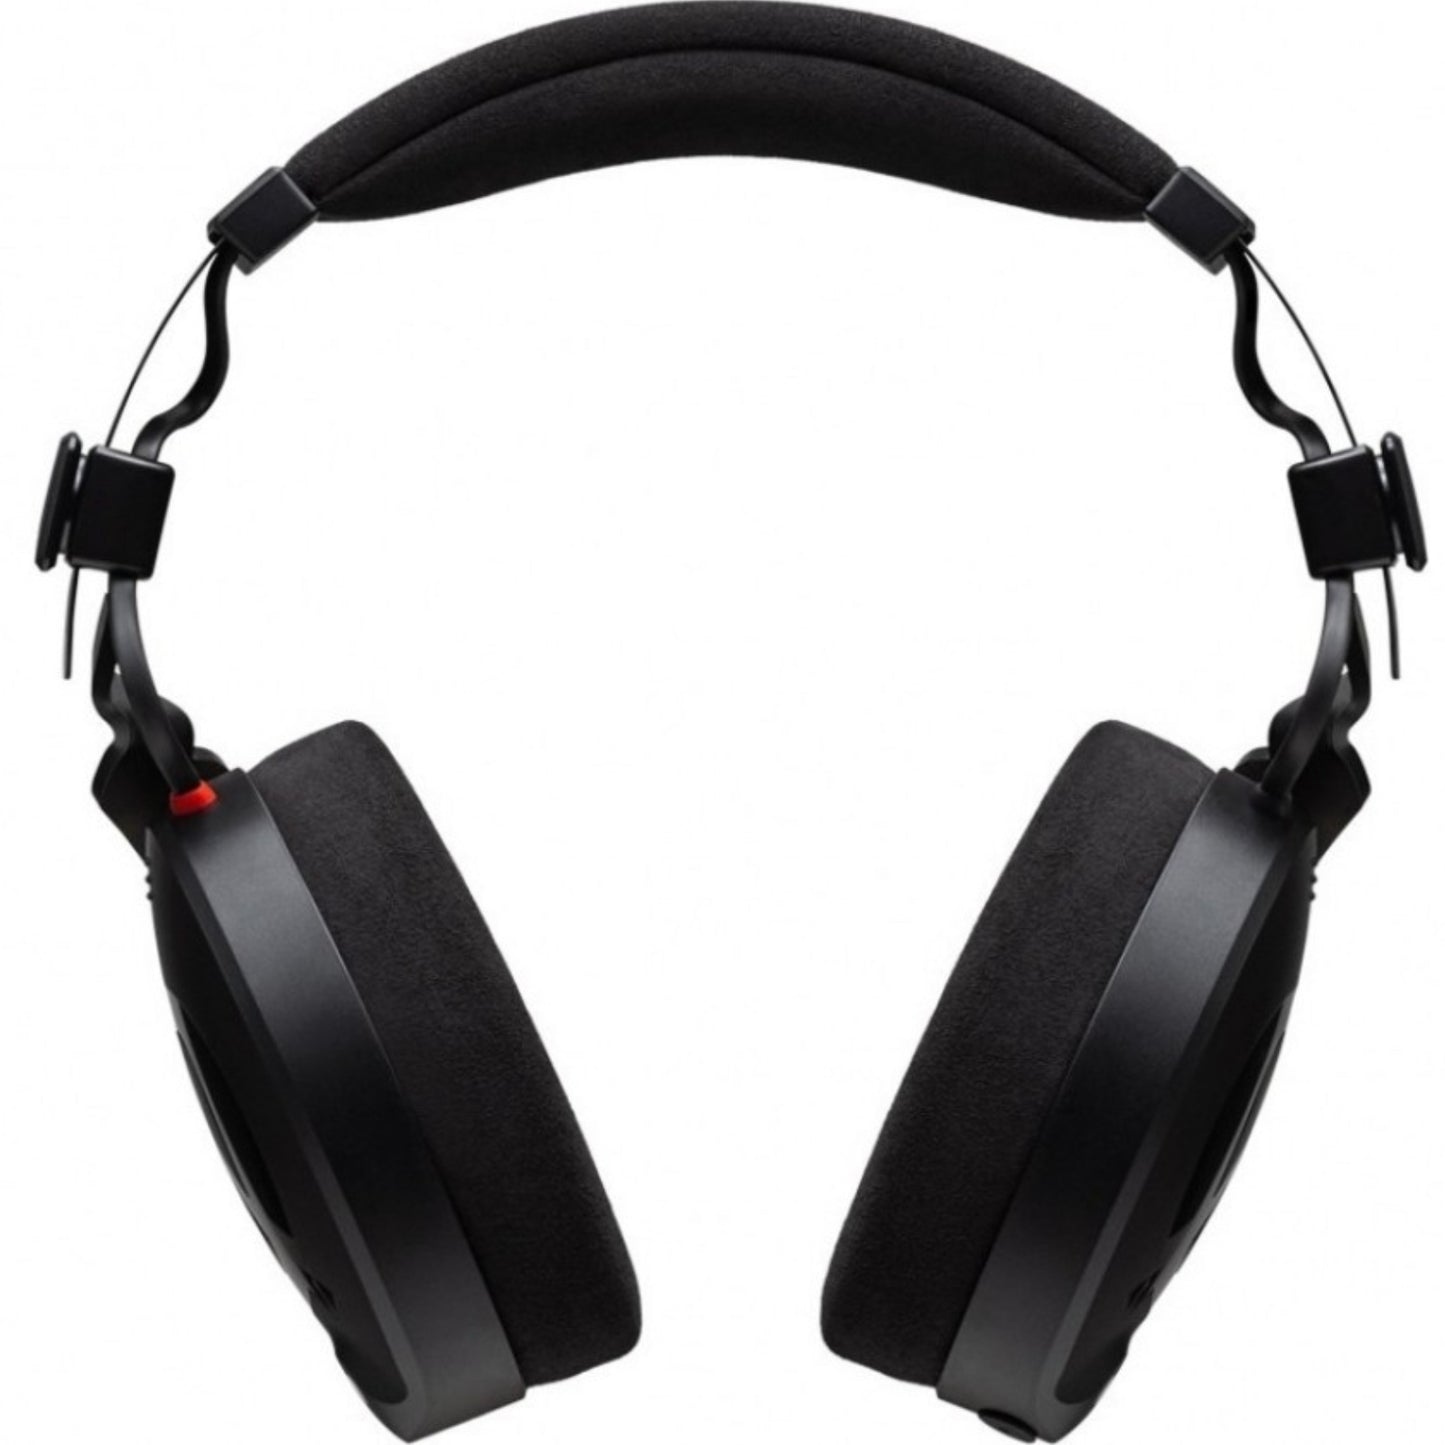 Rode NTH-100M Professional Over-Ear Headset - MyMobile